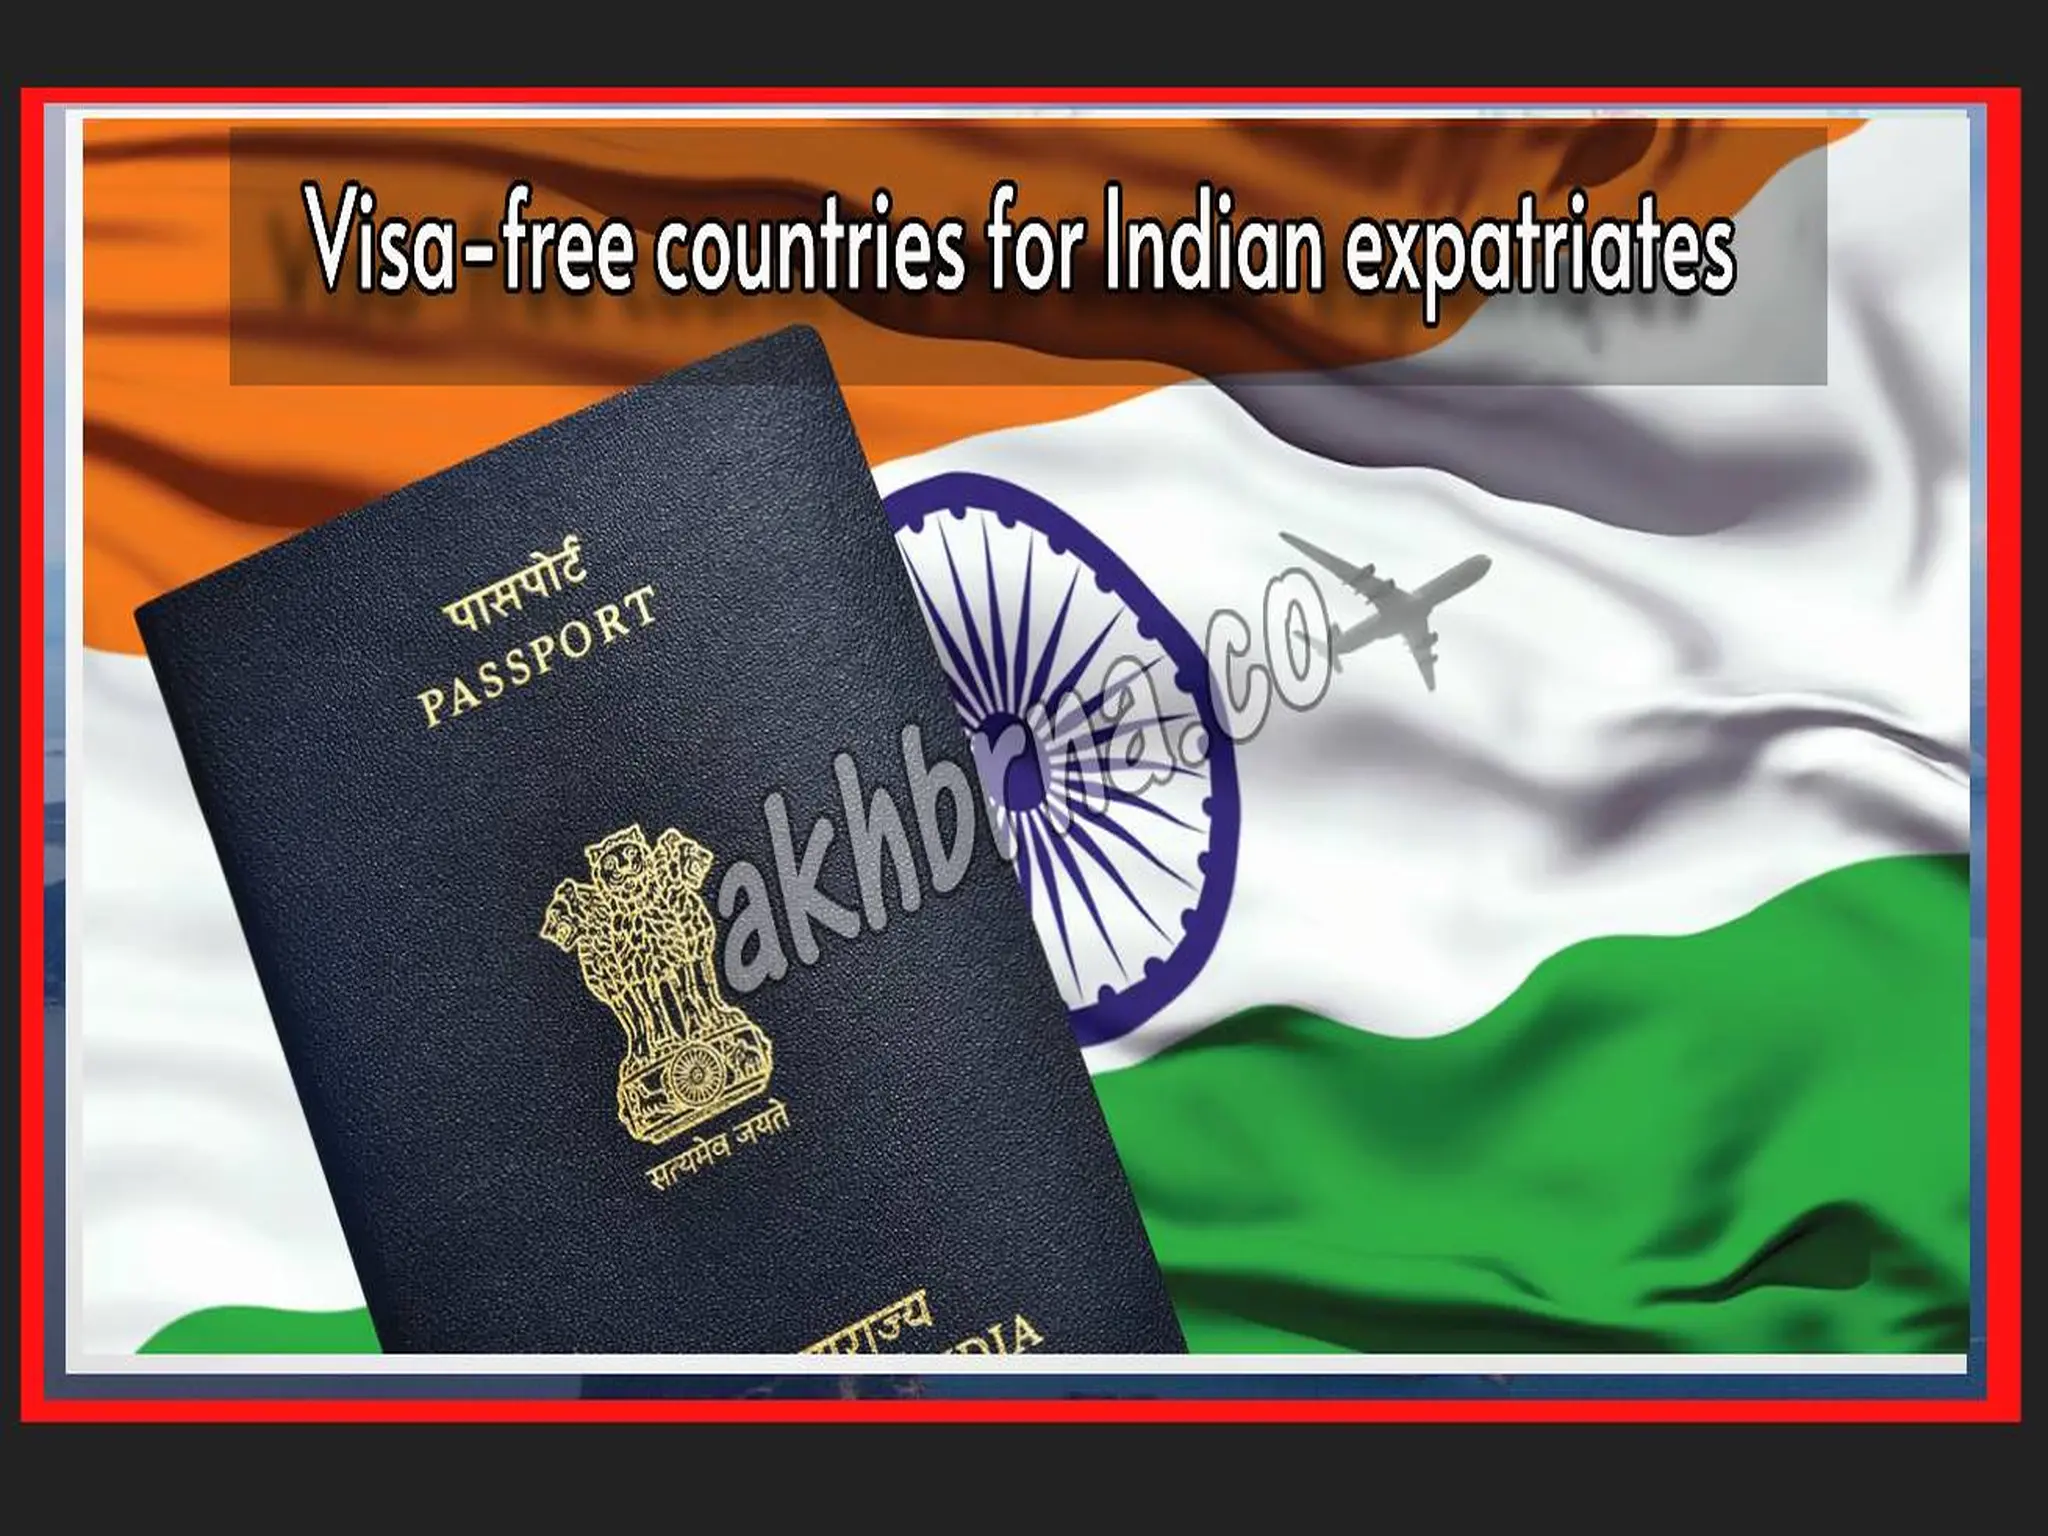 Visa-free countries for Indian expatriates